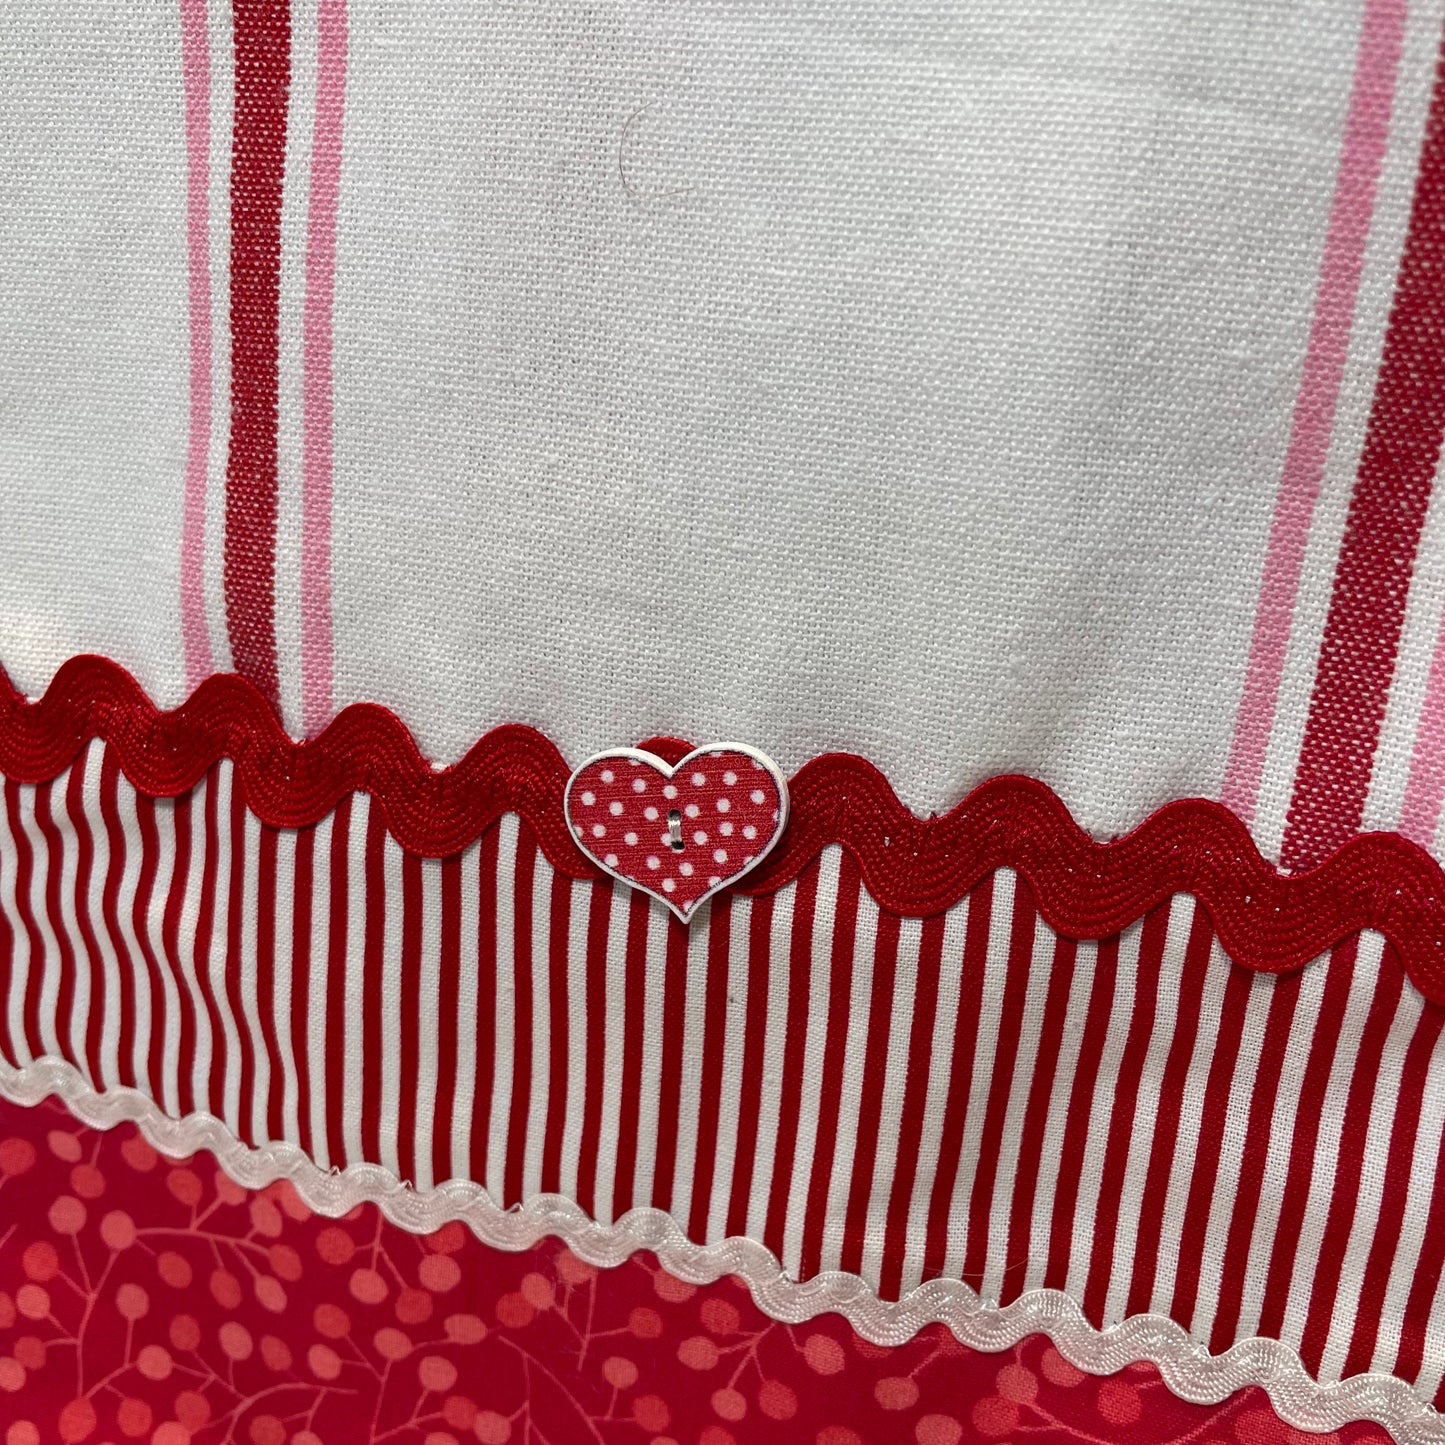 Cute red, white and pink towel with handcrafted quilting cotton accents. Featuring red Ric Rac, white Ric Rac and and heart shaped button. Part of a mix and match collection of coordinated kitchen and bath decor. Browse your favorites and be sure to follow along on the Home Stitchery Decor YouTube Channel